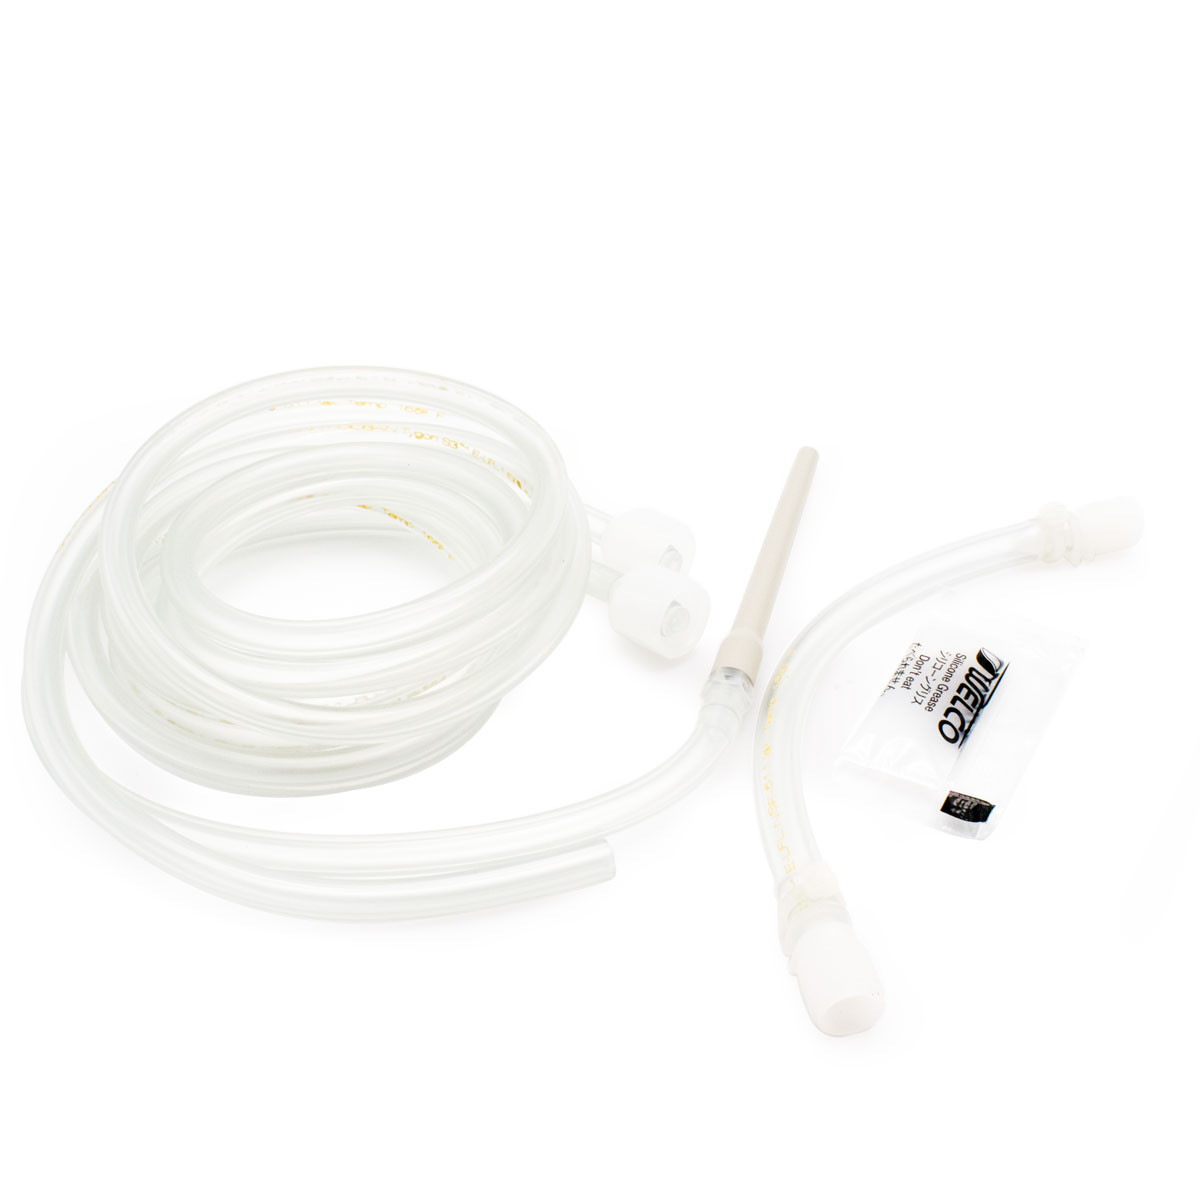 Peristaltic Pump Complete Tubing Set with Plastic Dispensing Tube for HI921 (TYGON E-LFL)